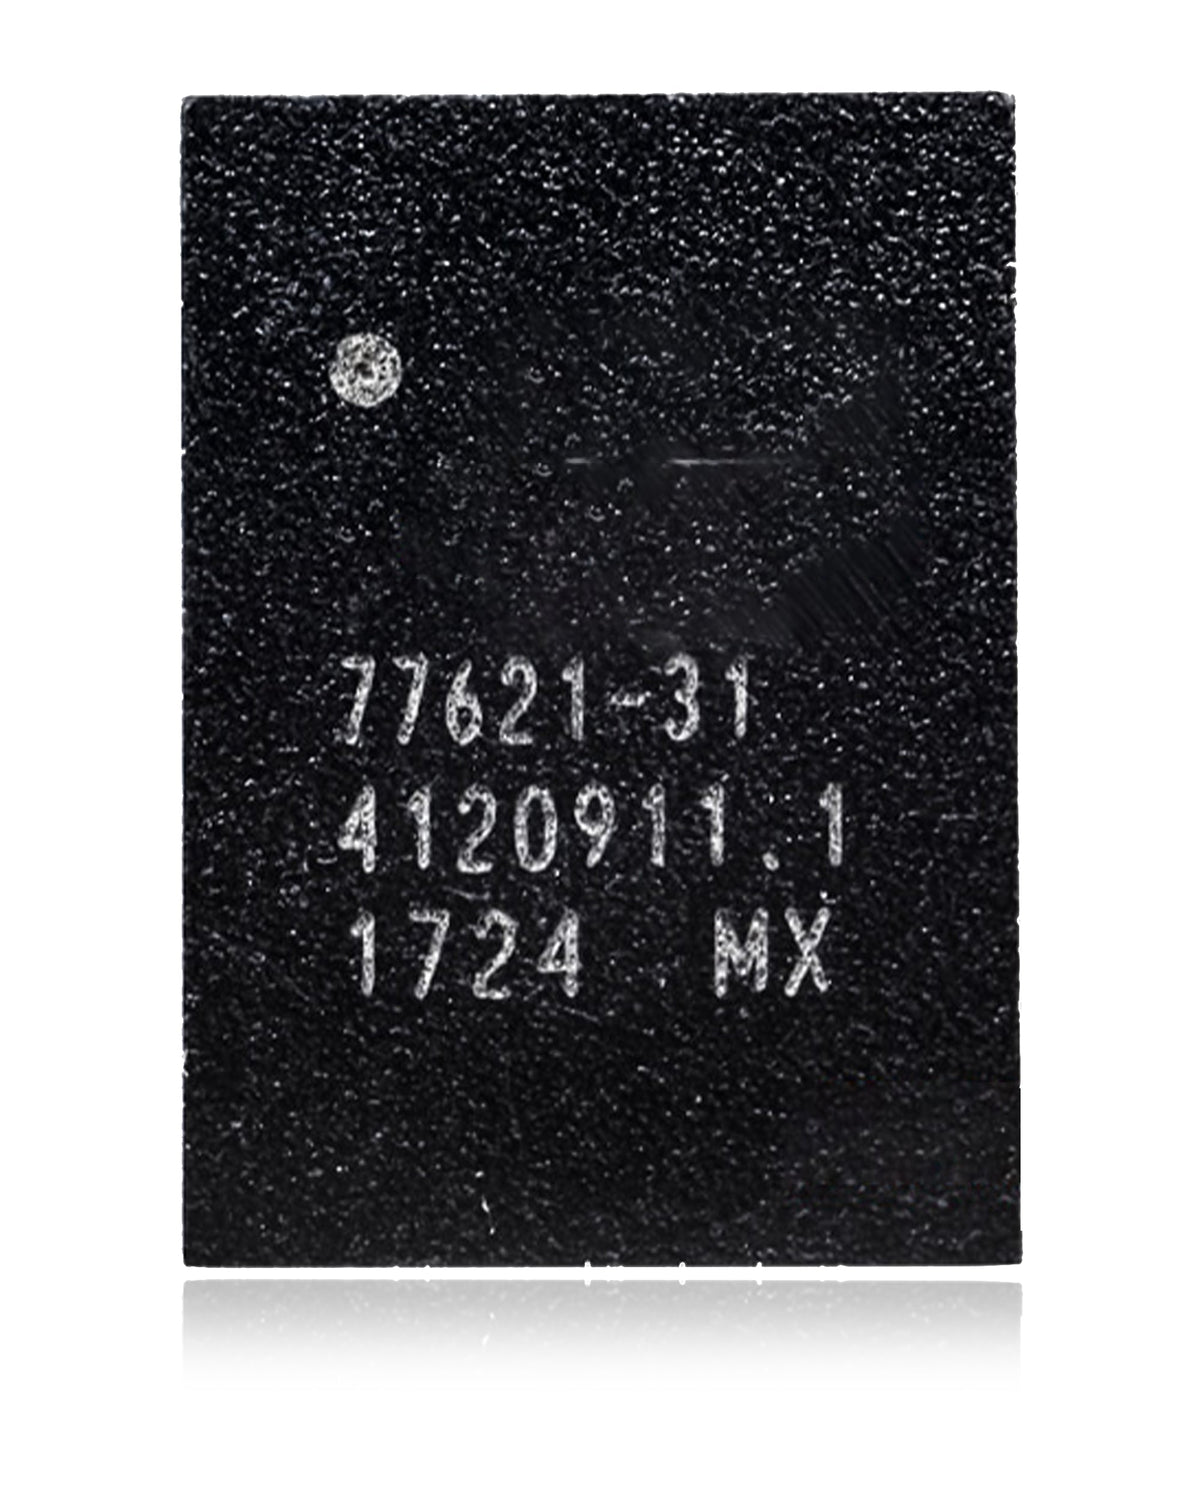 PA IC CHIP COMPATIBLE WITH IPHONE 7 / 7 PLUS (MHBDSM_RF: D5315)